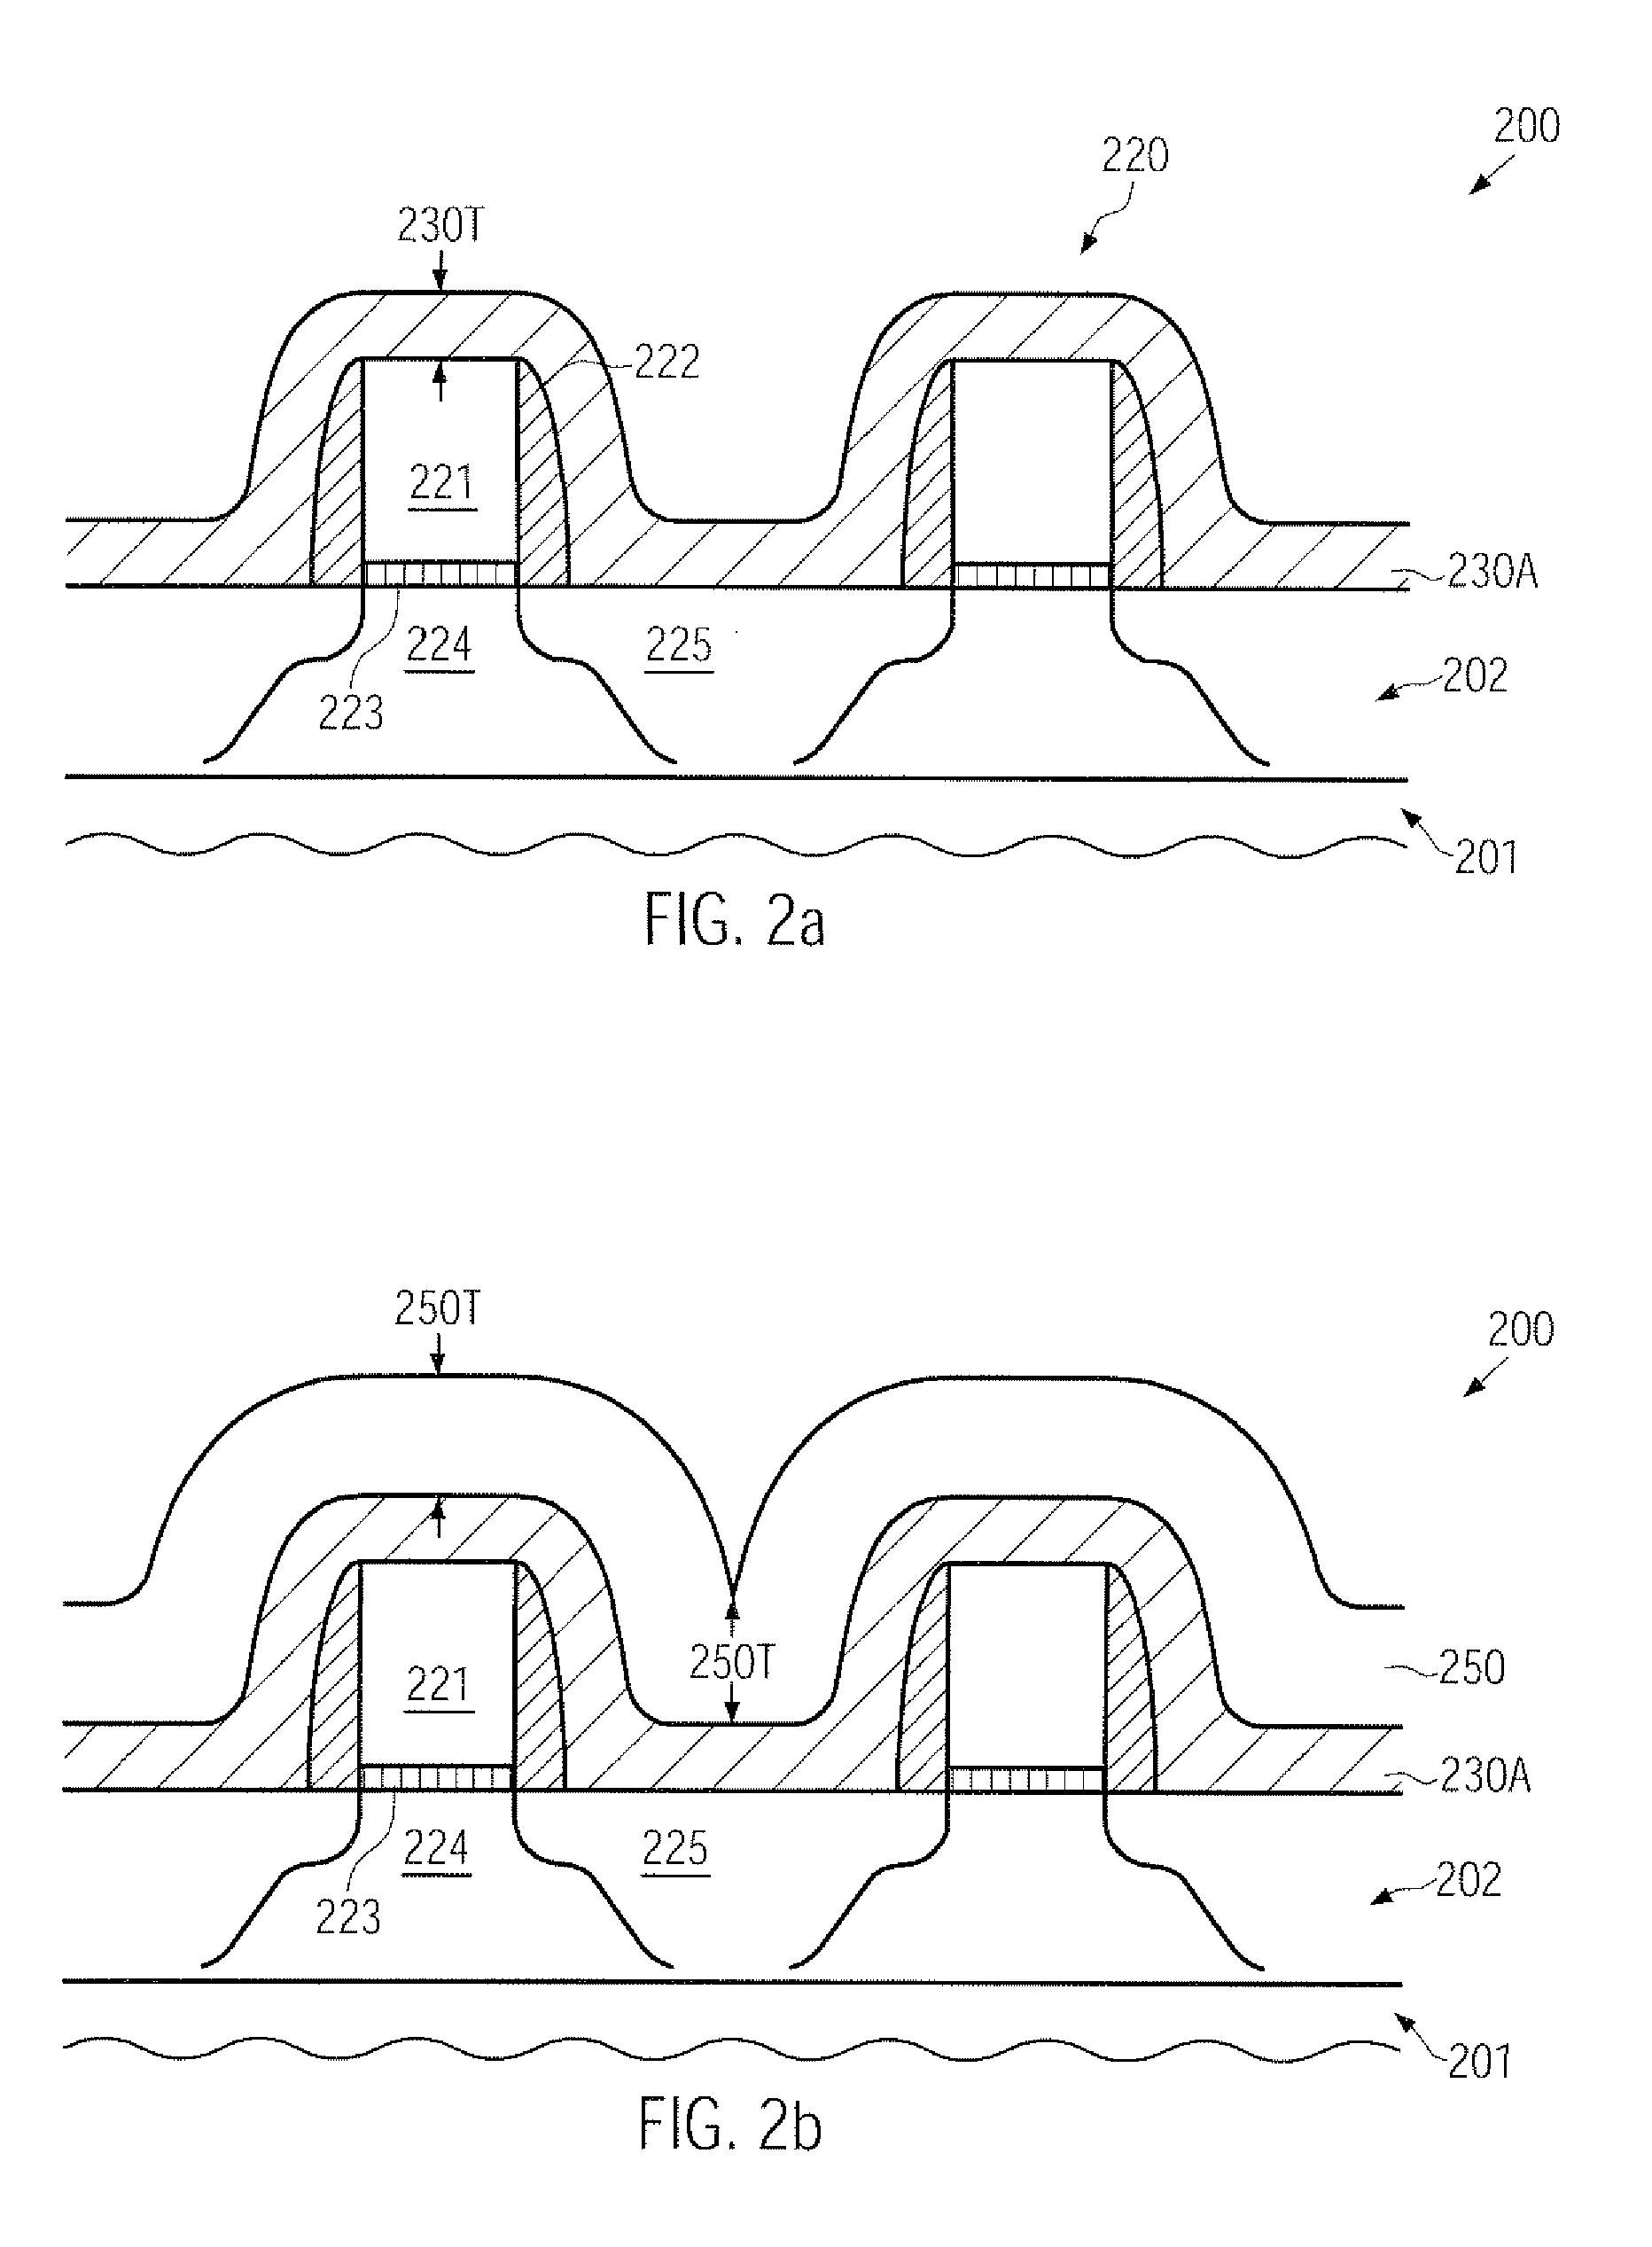 Interlayer dielectric material in a semiconductor device comprising stressed layers with an intermediate buffer material